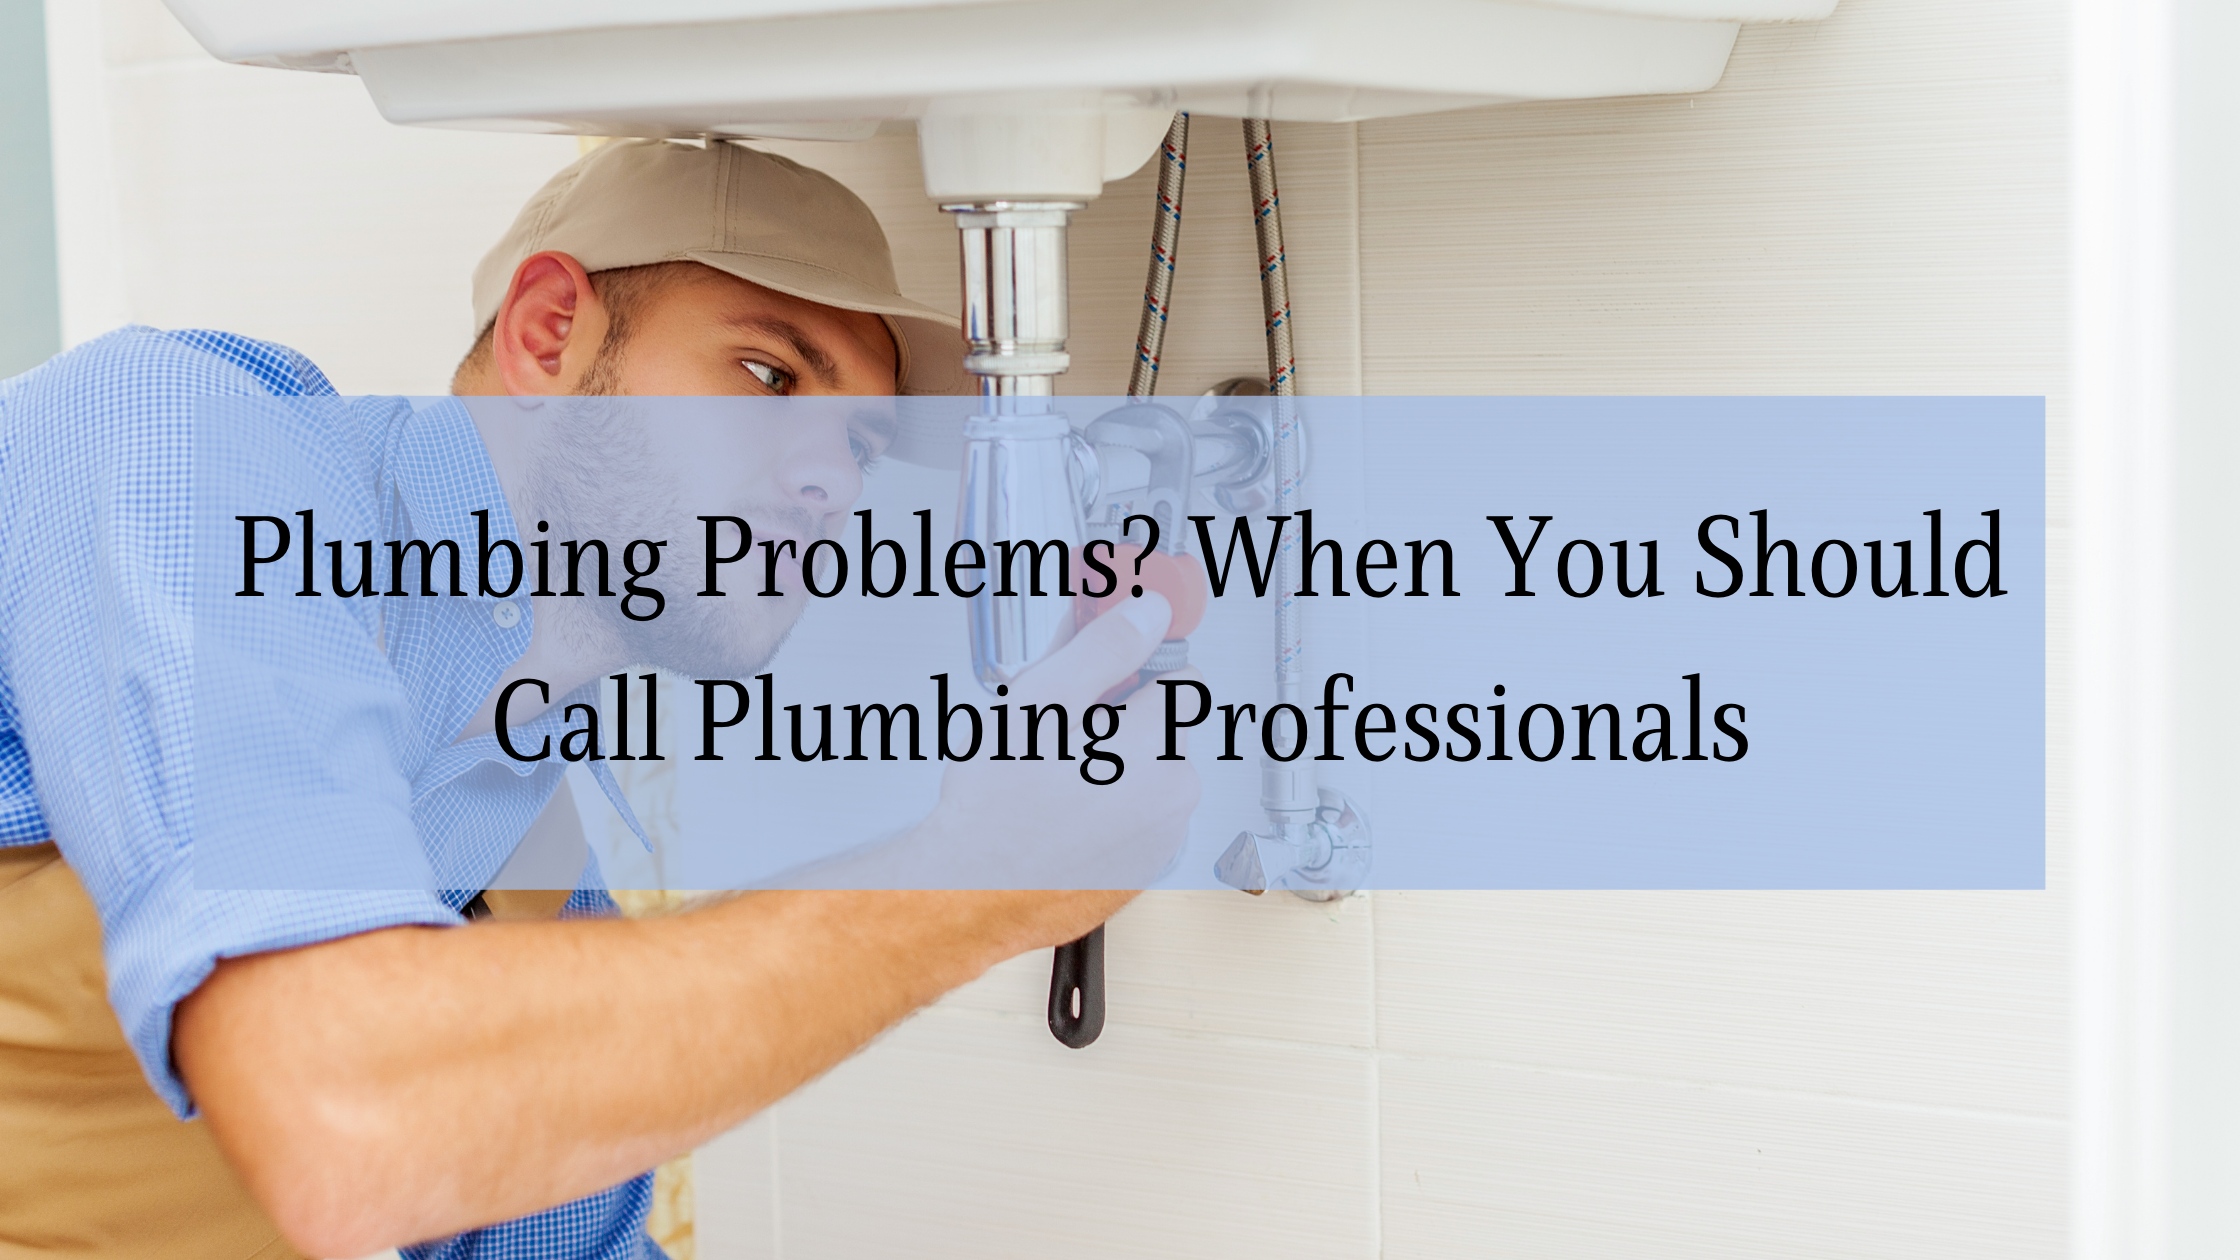 https://雷竞技下载链接官网appwww.explorizers.com/wp-content/uploads/2021/05/Plumbing-Problems_-When-you-Should-Call-Plumbing-Professionals.png